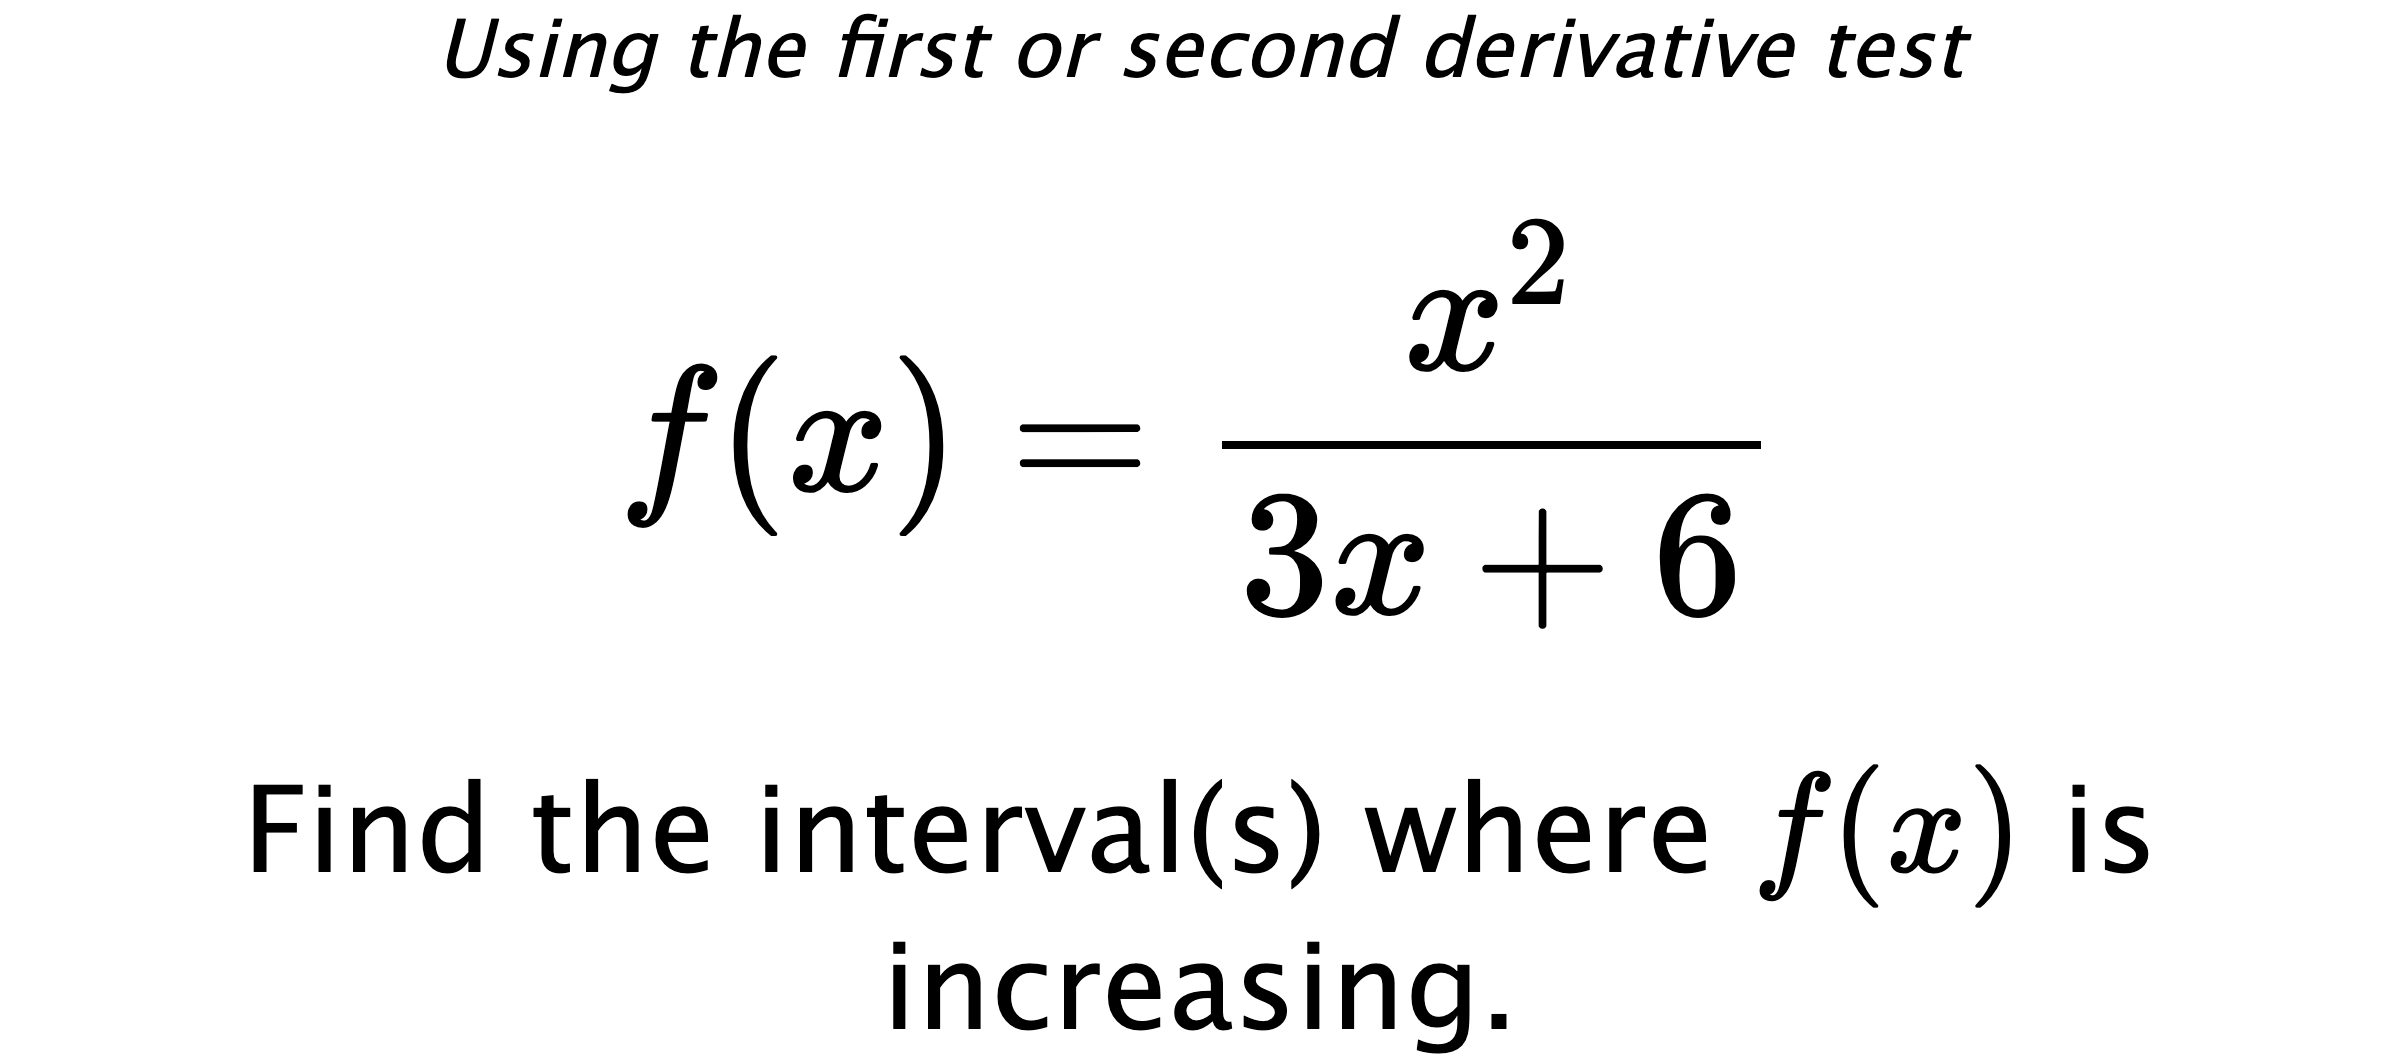 Using the first or second derivative test $$ f(x)=\frac{x^2}{3x+6} $$ Find the interval(s) where $ f(x) $ is increasing.